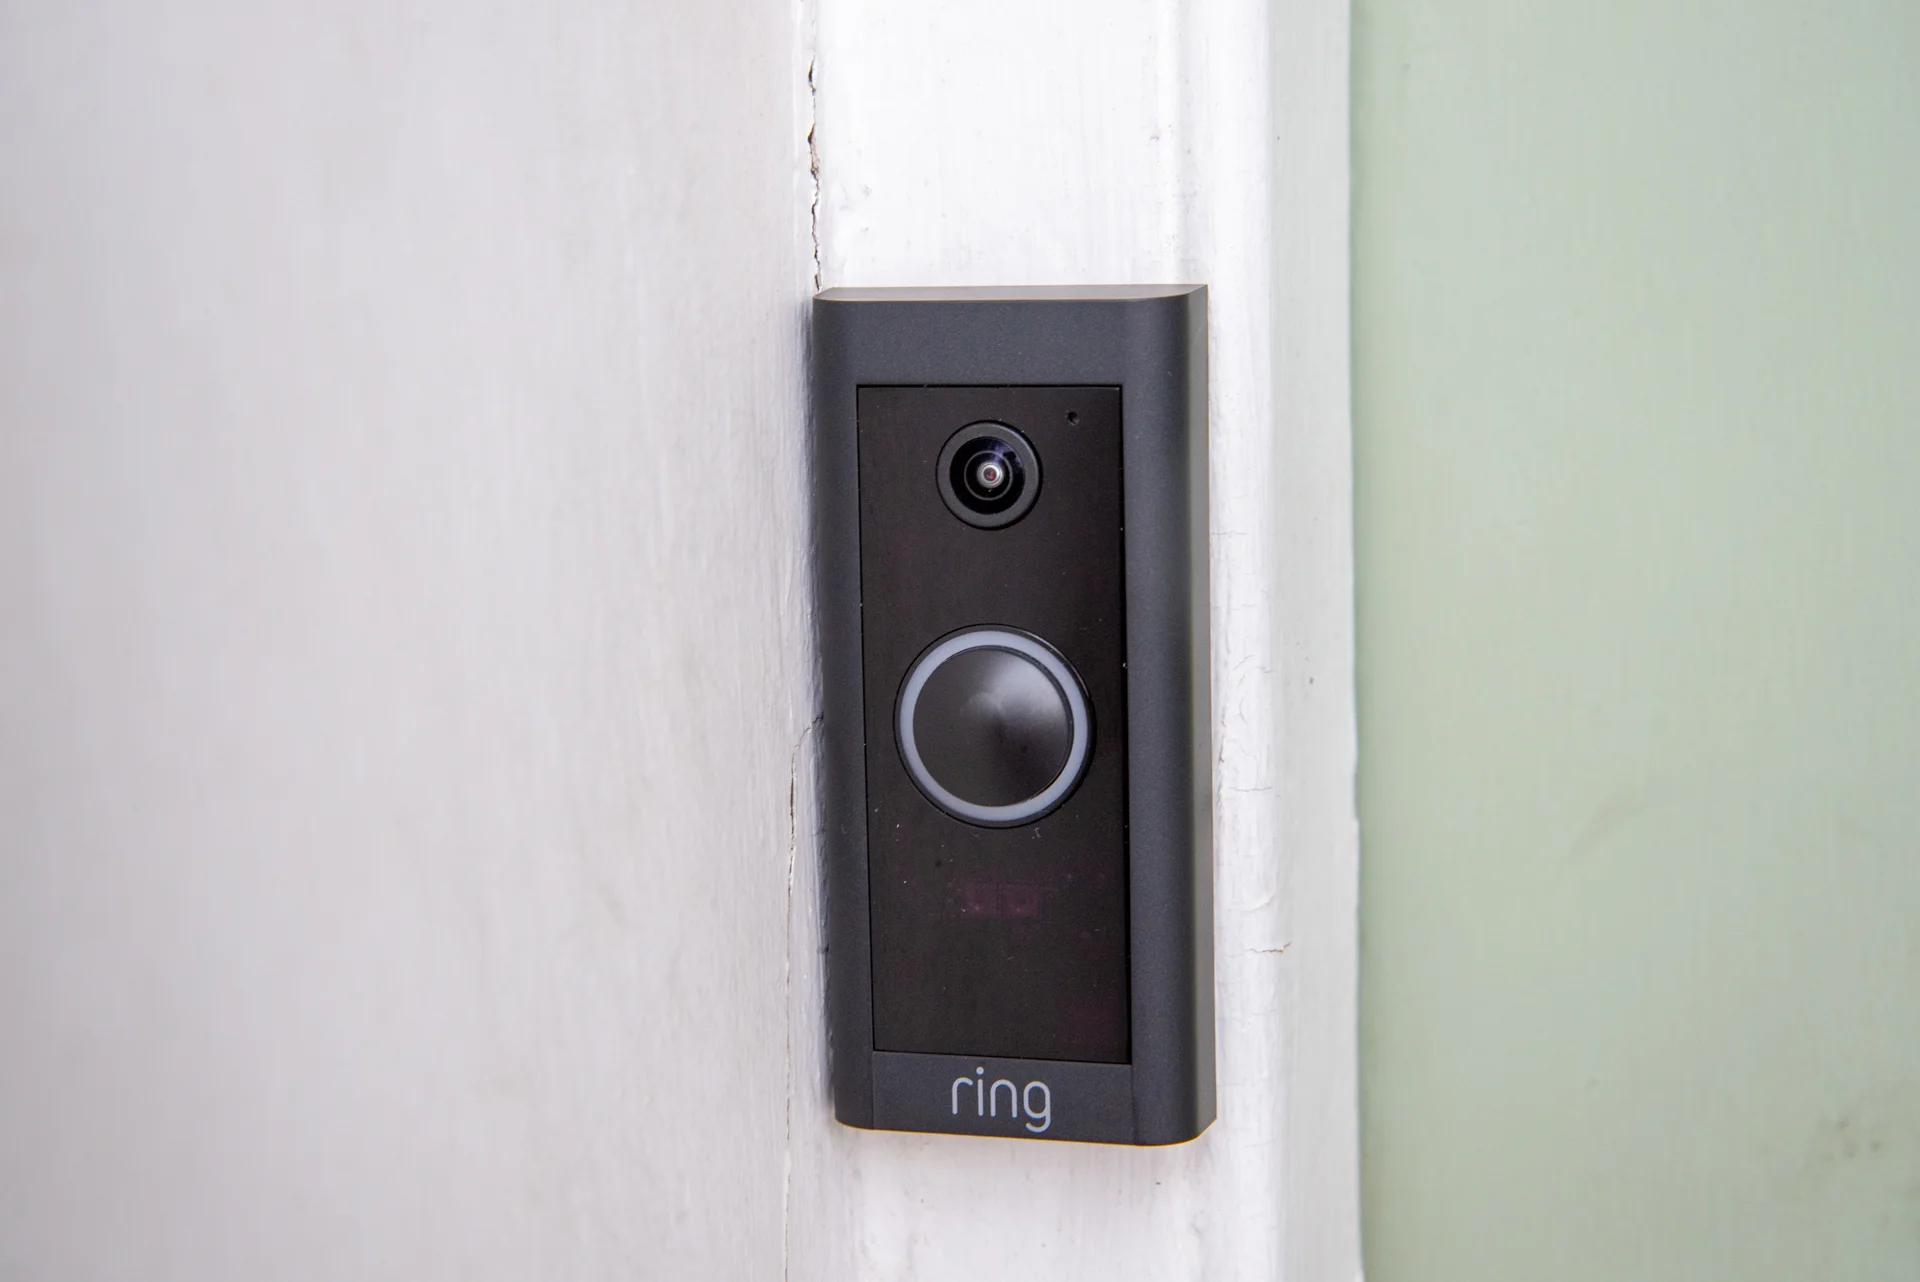 How to Fix Ring Doorbell Not Ringing